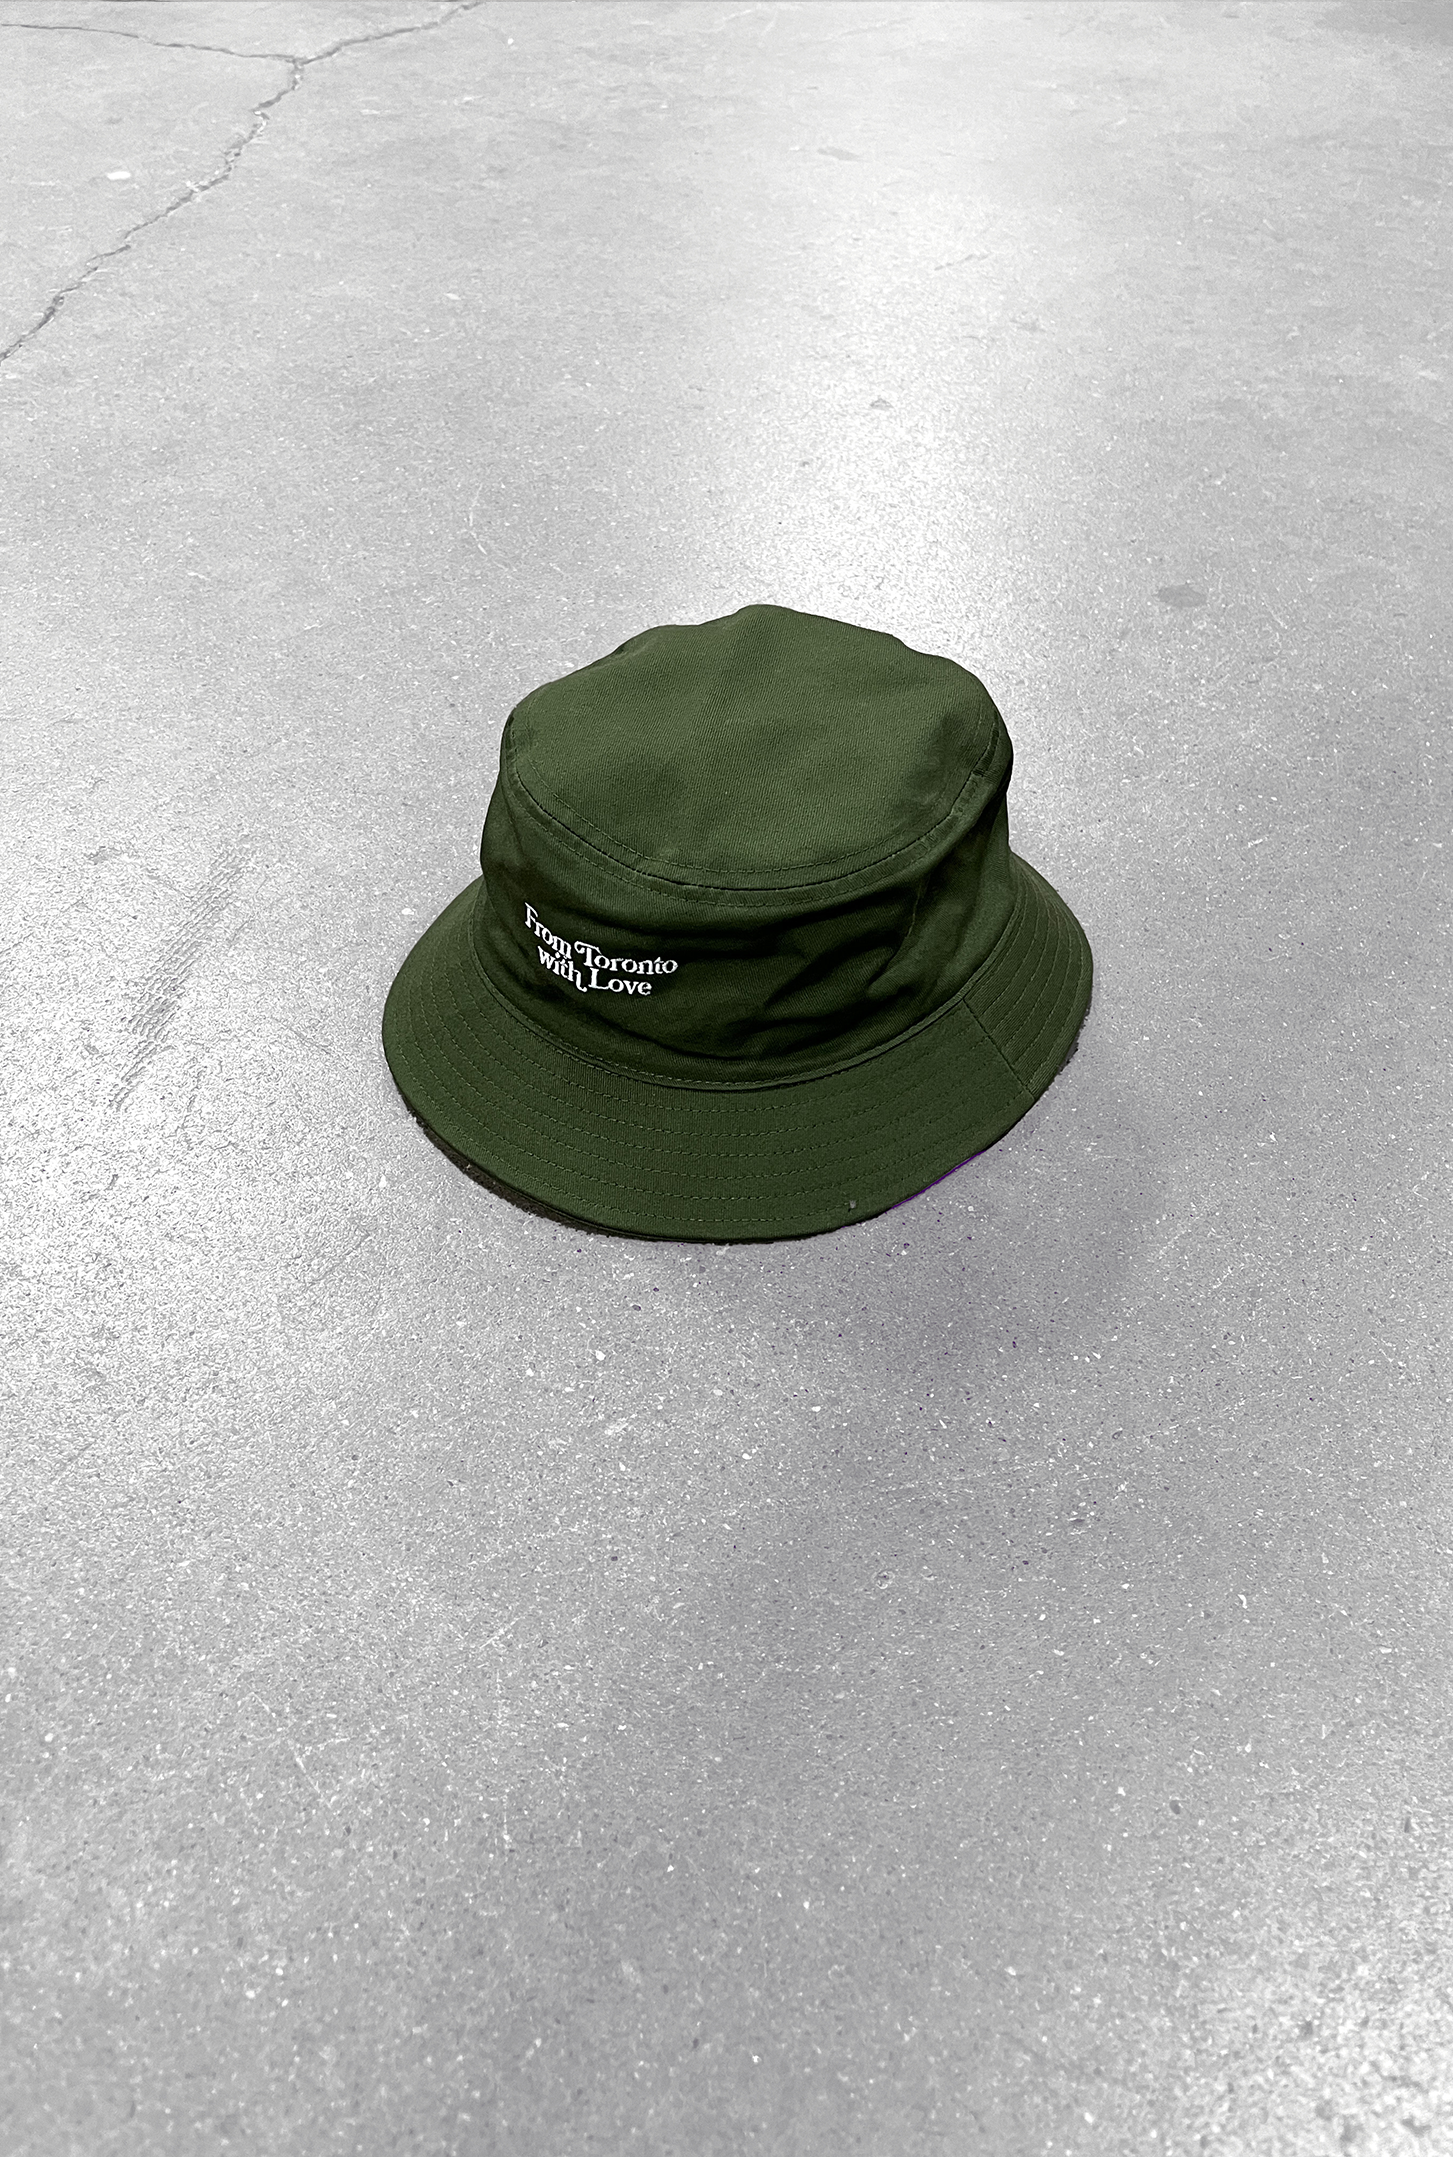 From Toronto with Love Bucket Hat - Army Green